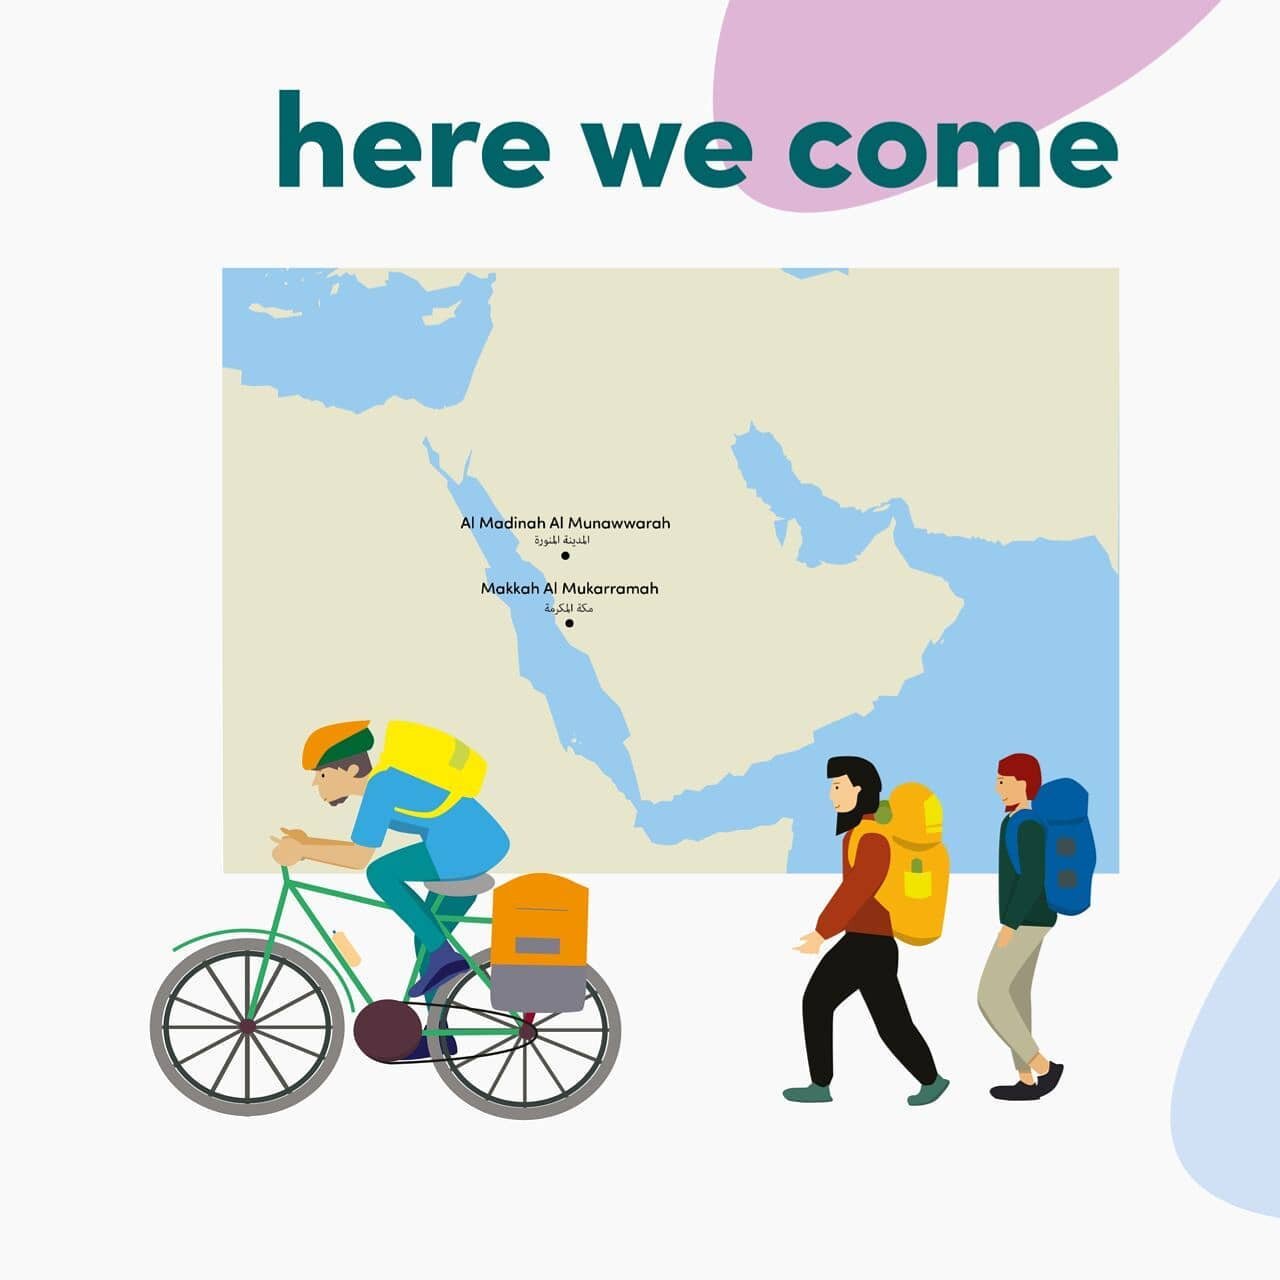 Some people walk, some people cycle.

To Mecca, here they come!

#oliekbooks
#islamicchildrenbook
#islamicbook
#islamicbooksforchildren
#islamicbooksforkids
#muslimparenting